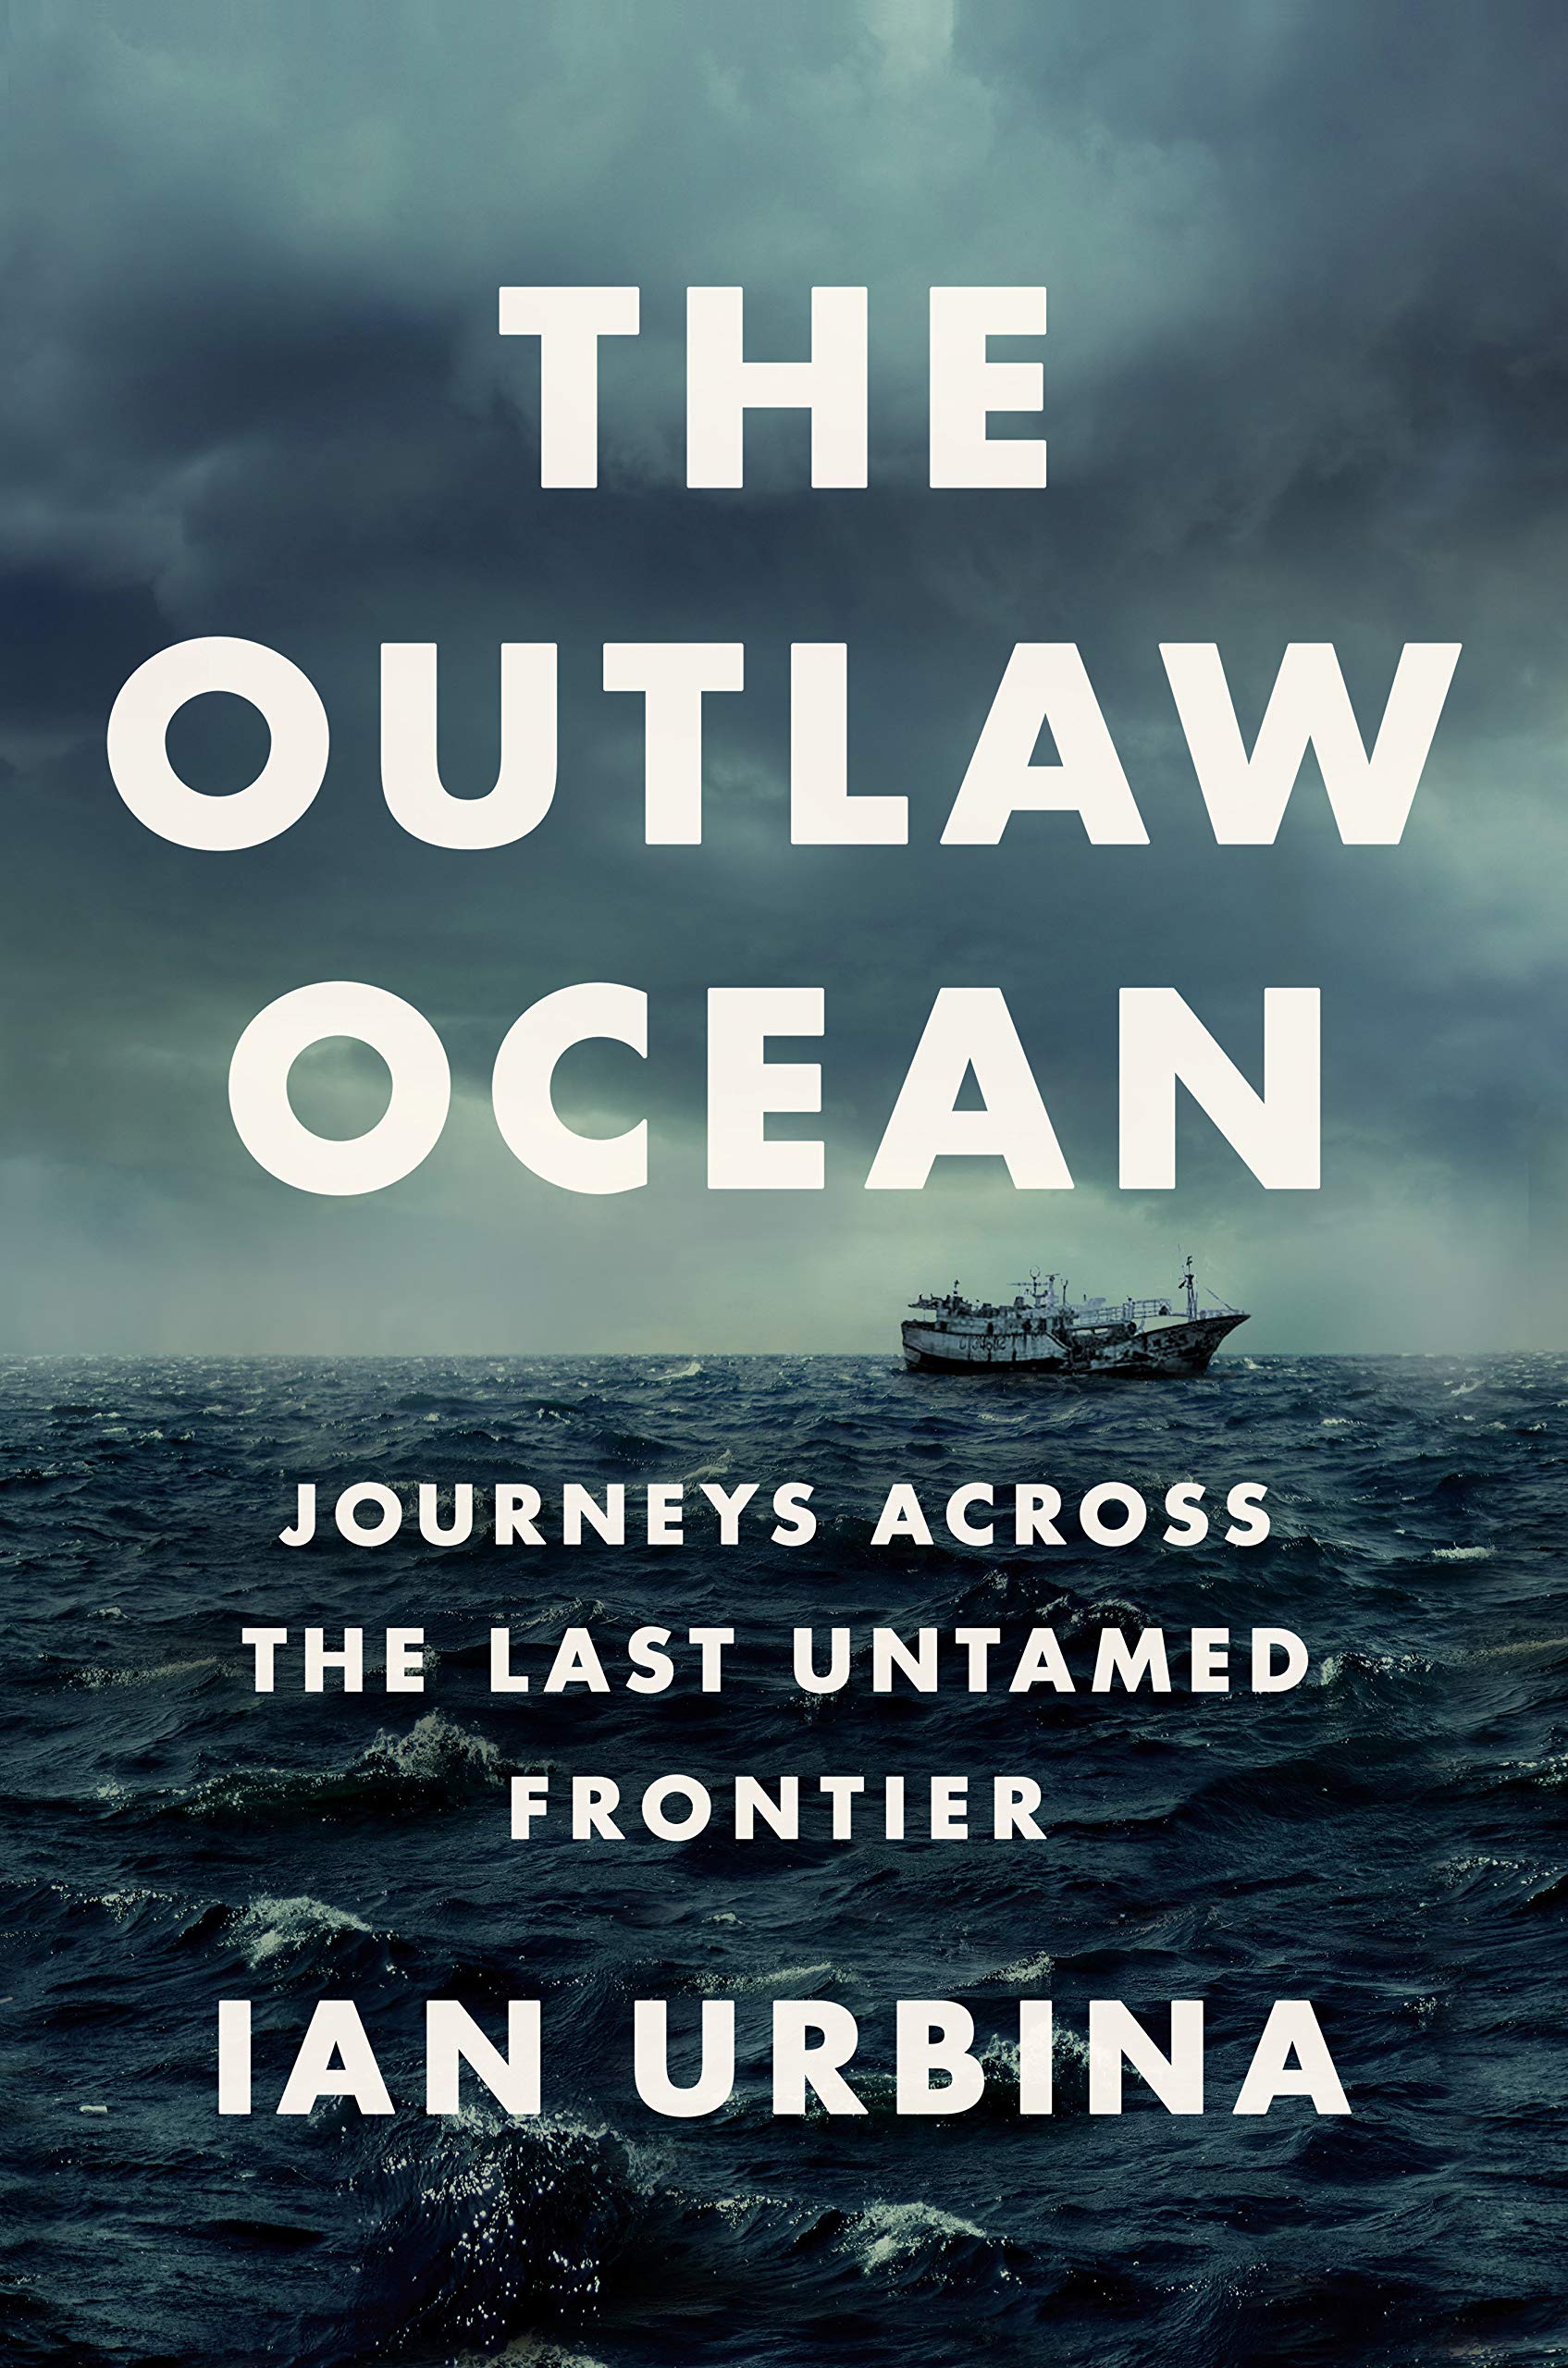 Image for "The Outlaw Ocean"